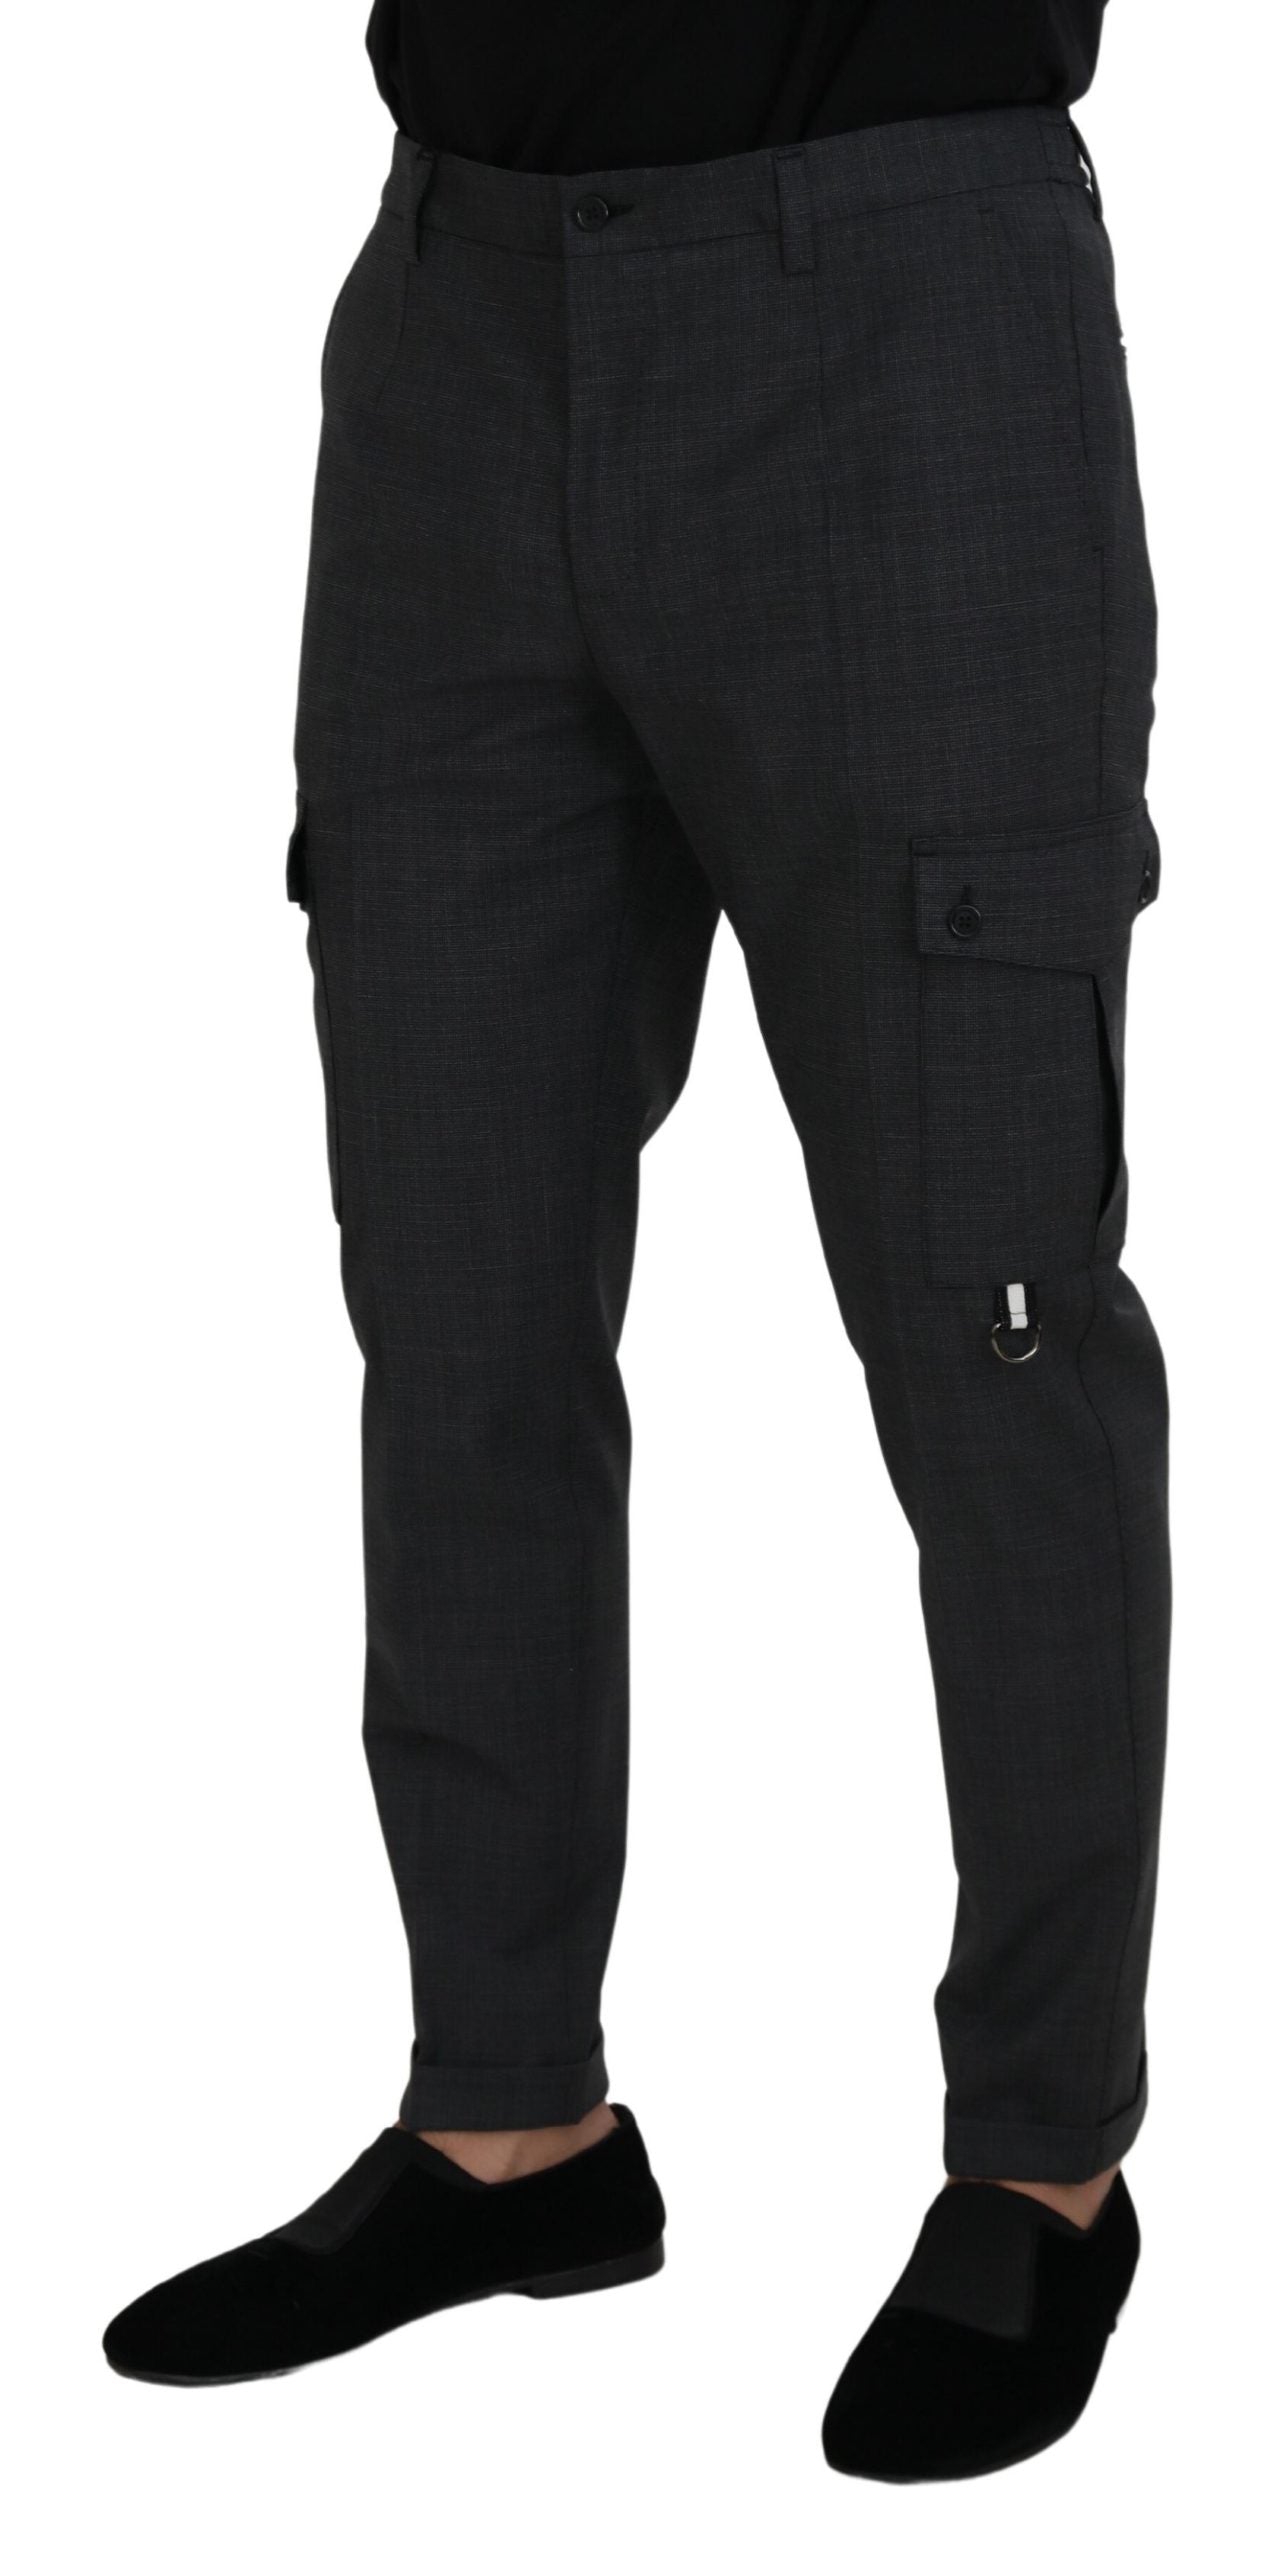 Dolce & Gabbana Gray Checked Cargo Trousers Stretch Pants